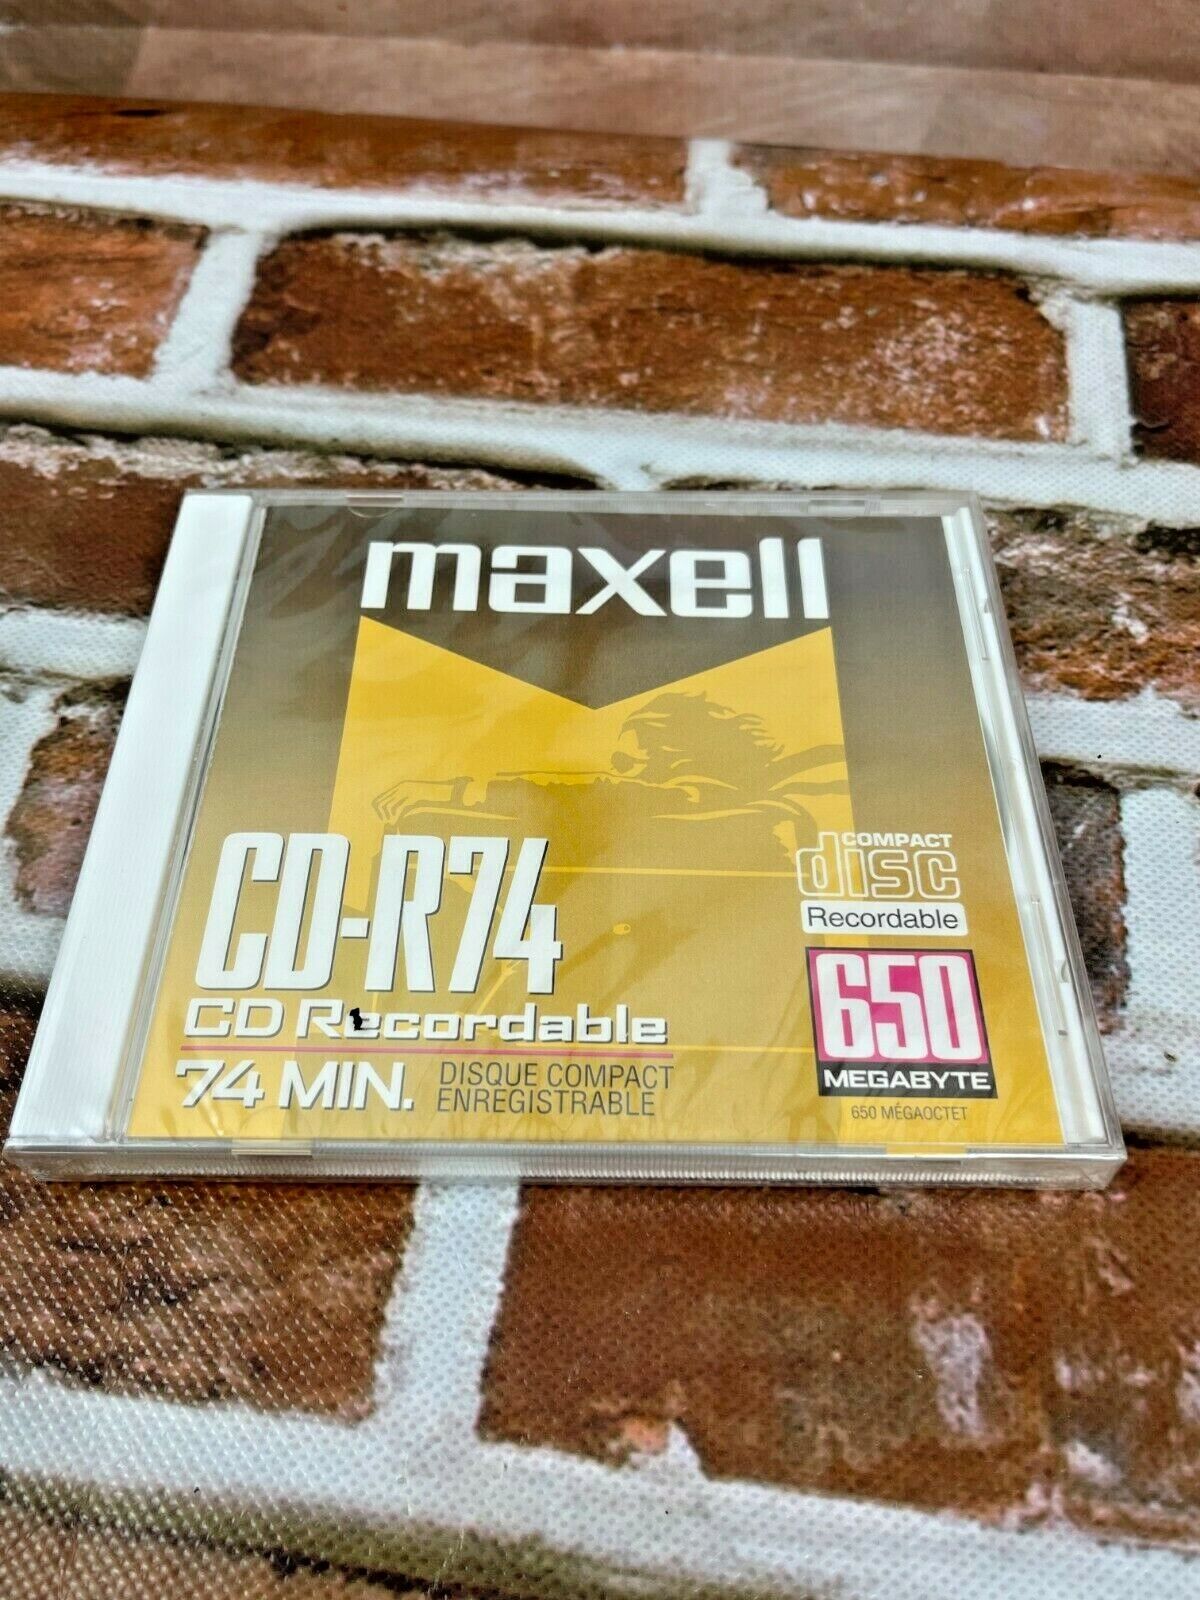 Maxell CD-R74 CD Recordable 74 Min.Sealed 